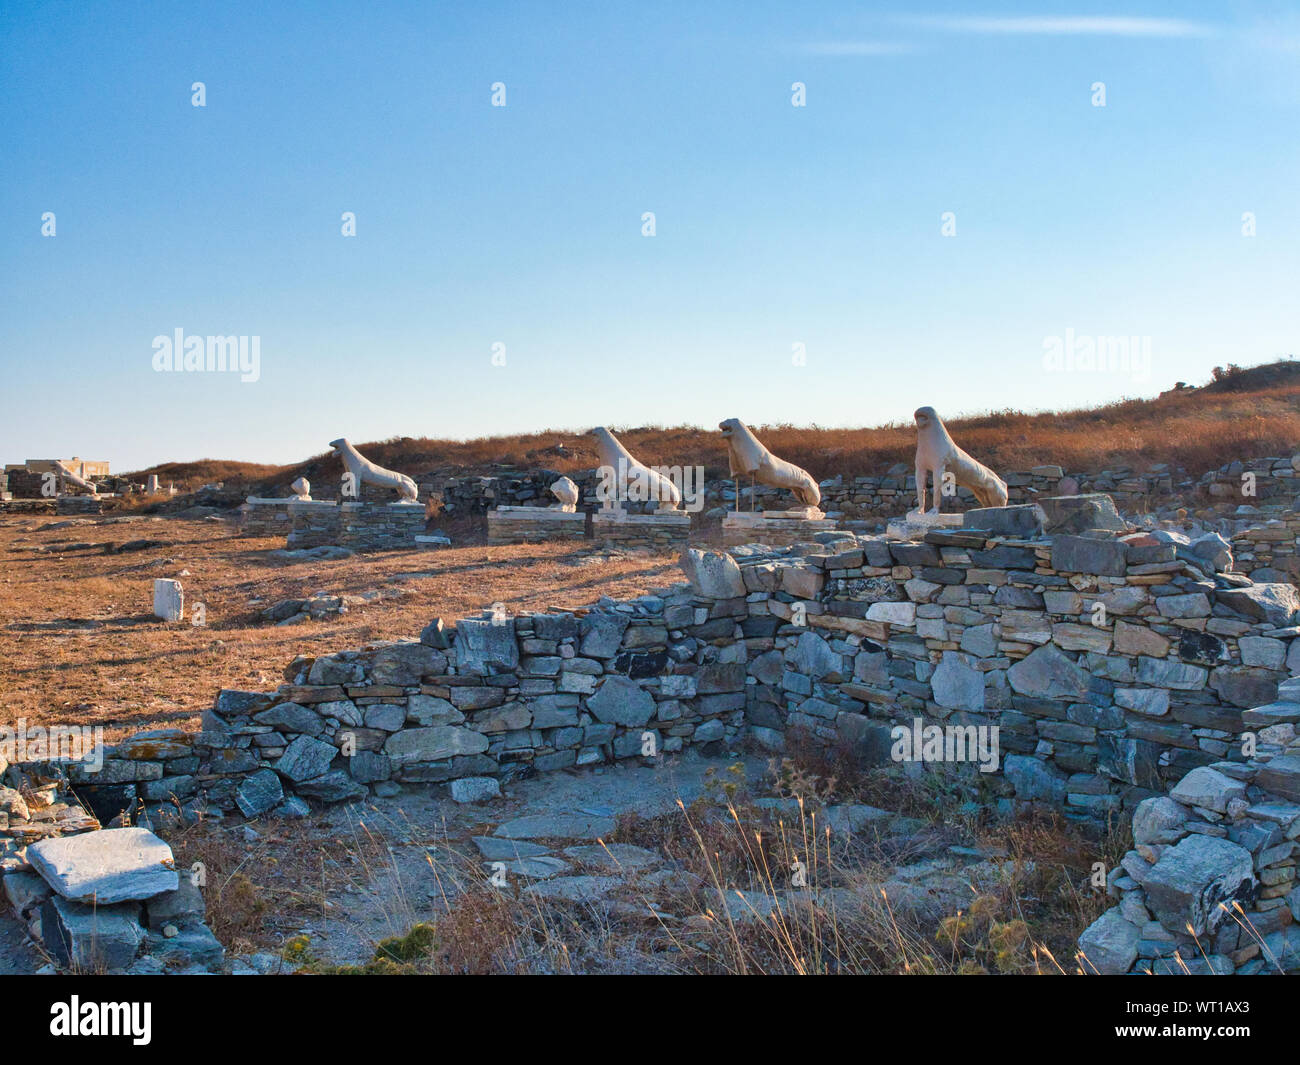 Ruined stone building and statues of lions set on pedestals on sacred island of Delos Greece against blue sky background Stock Photo